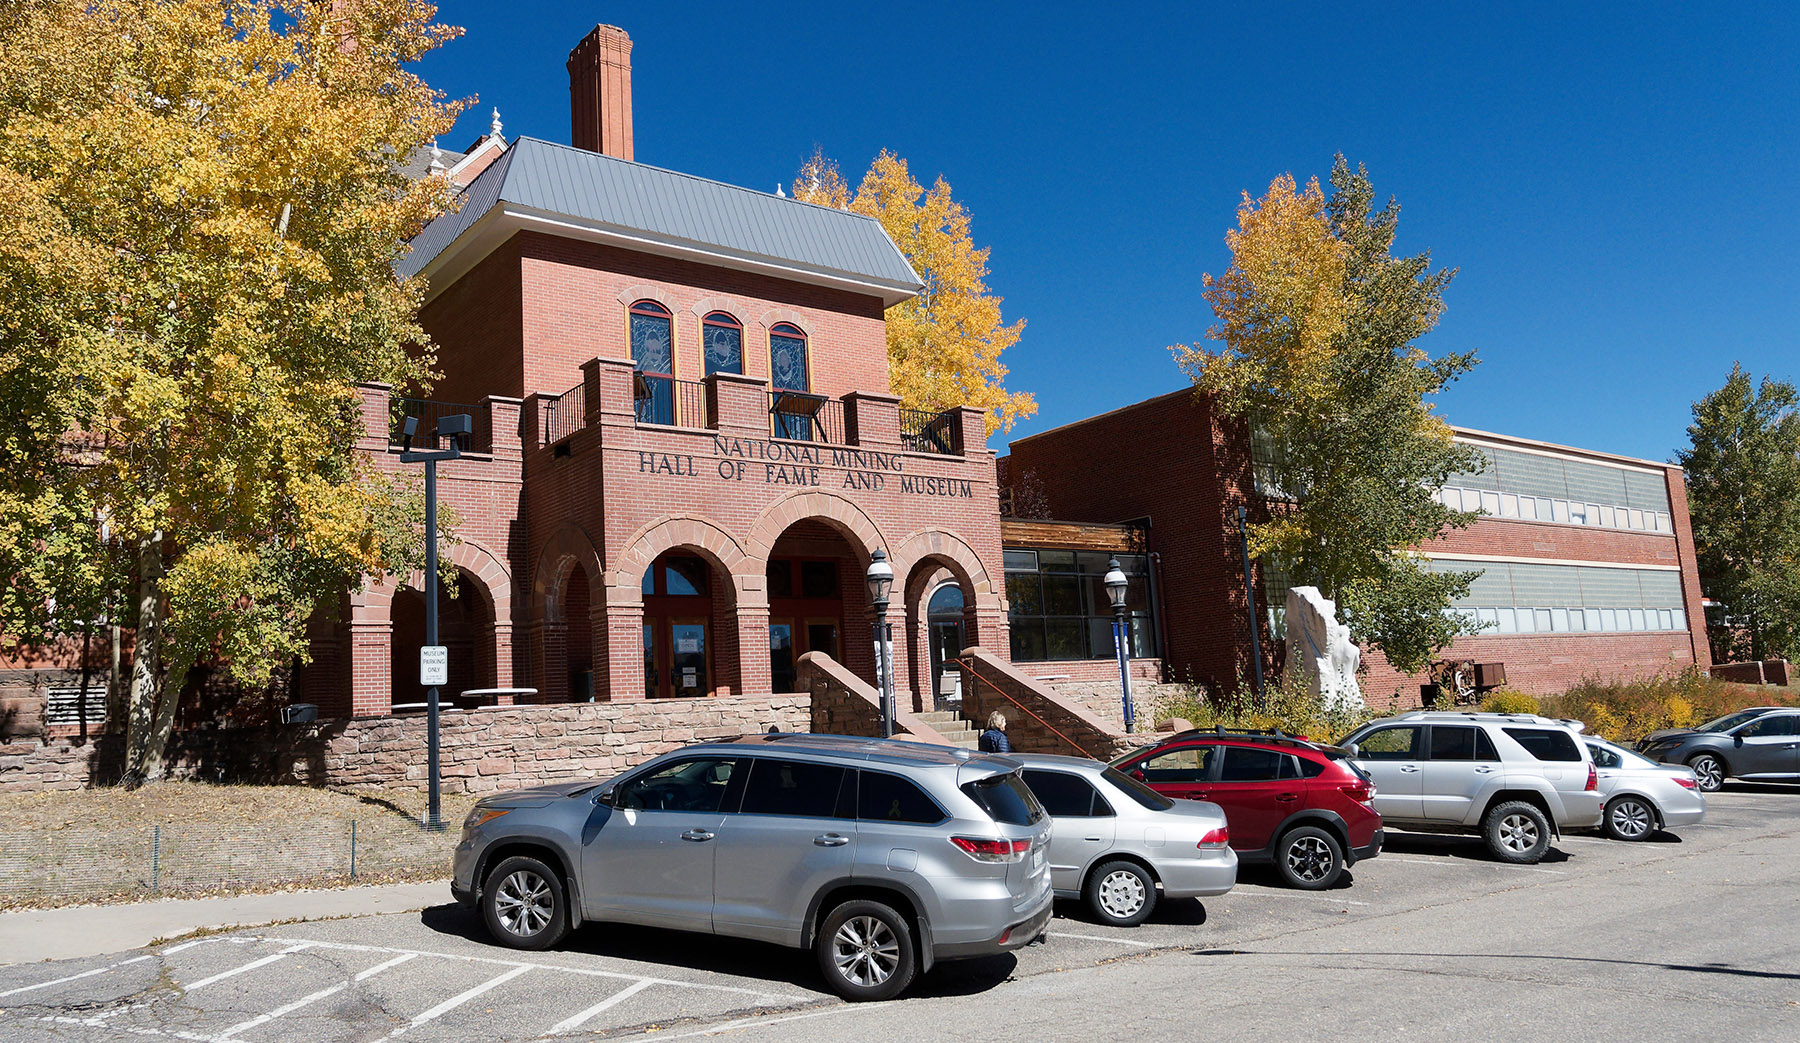 National Mining Hall of Fame and Museum in Leadville CO.  The museum has exceptional exhibits of mine history in the area and worldwide.